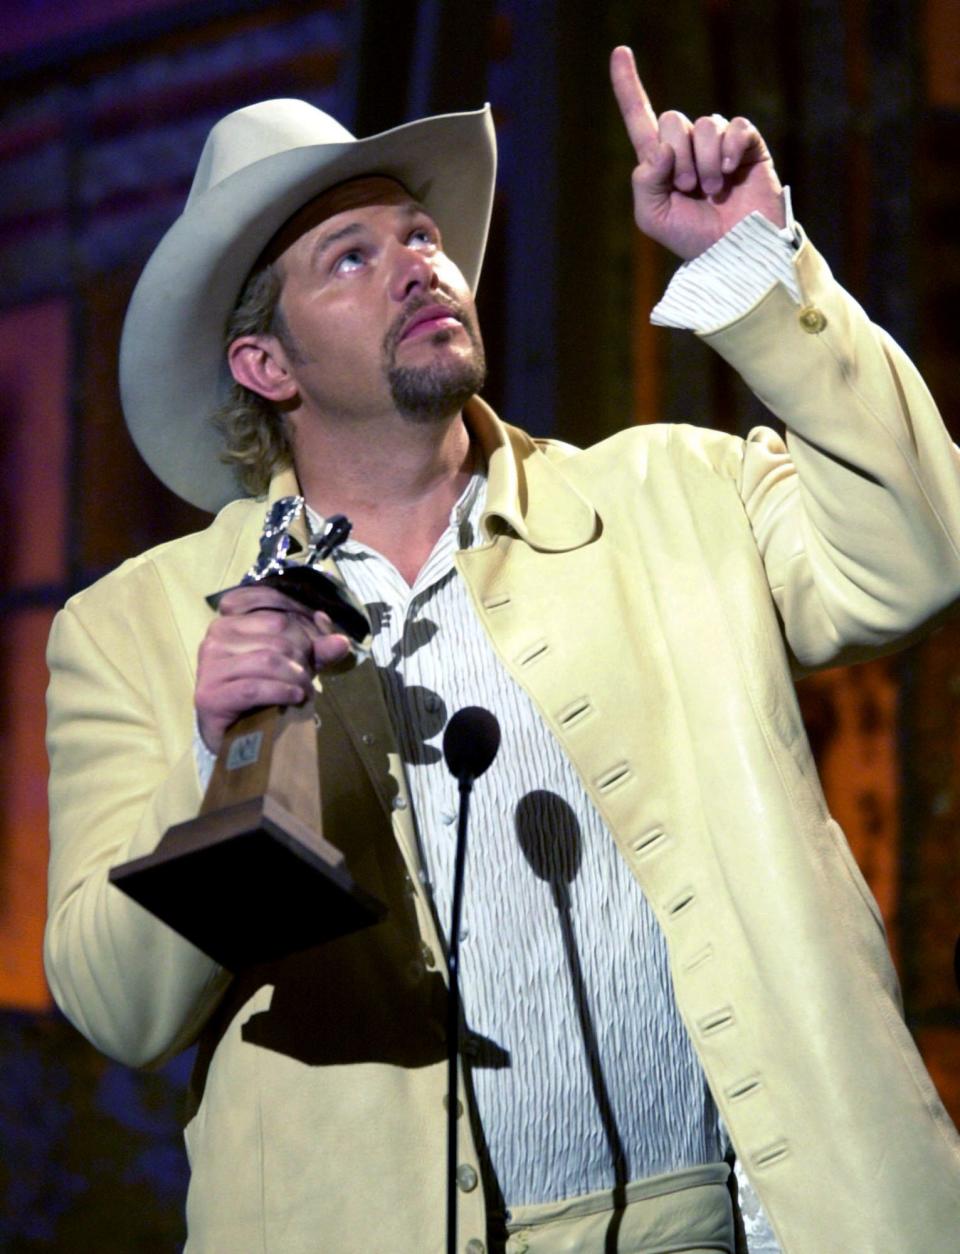 Toby Keith thanks his father as he accepts the award for Album of the Year for "How Do You Like Me Now?" during the 36th annual Academy of Country Music Awards show on May 9, 2001 in Los Angeles.